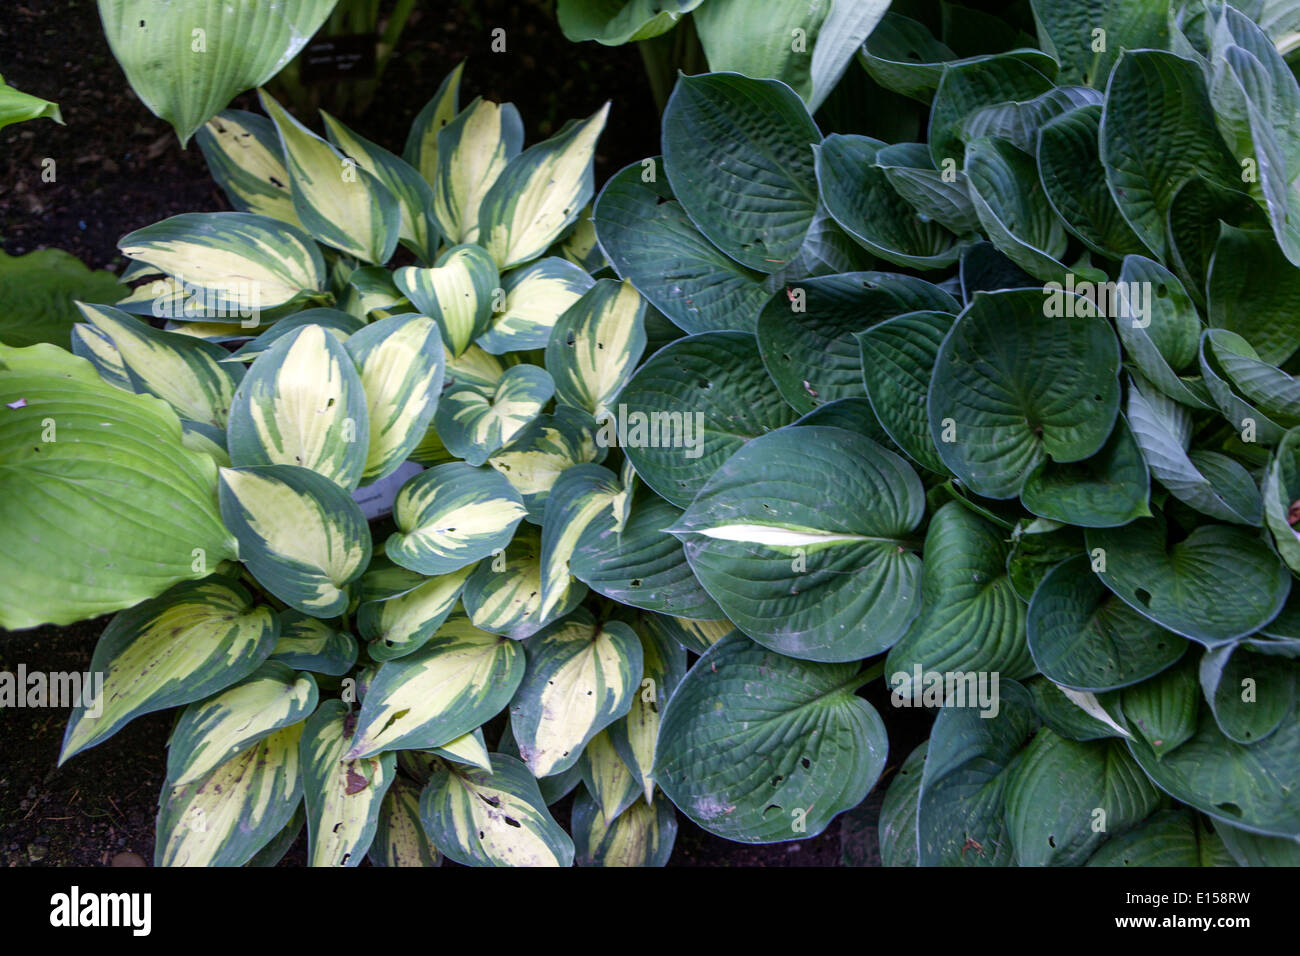 Hosta, plant in shade garden, variegated leaves Stock Photo